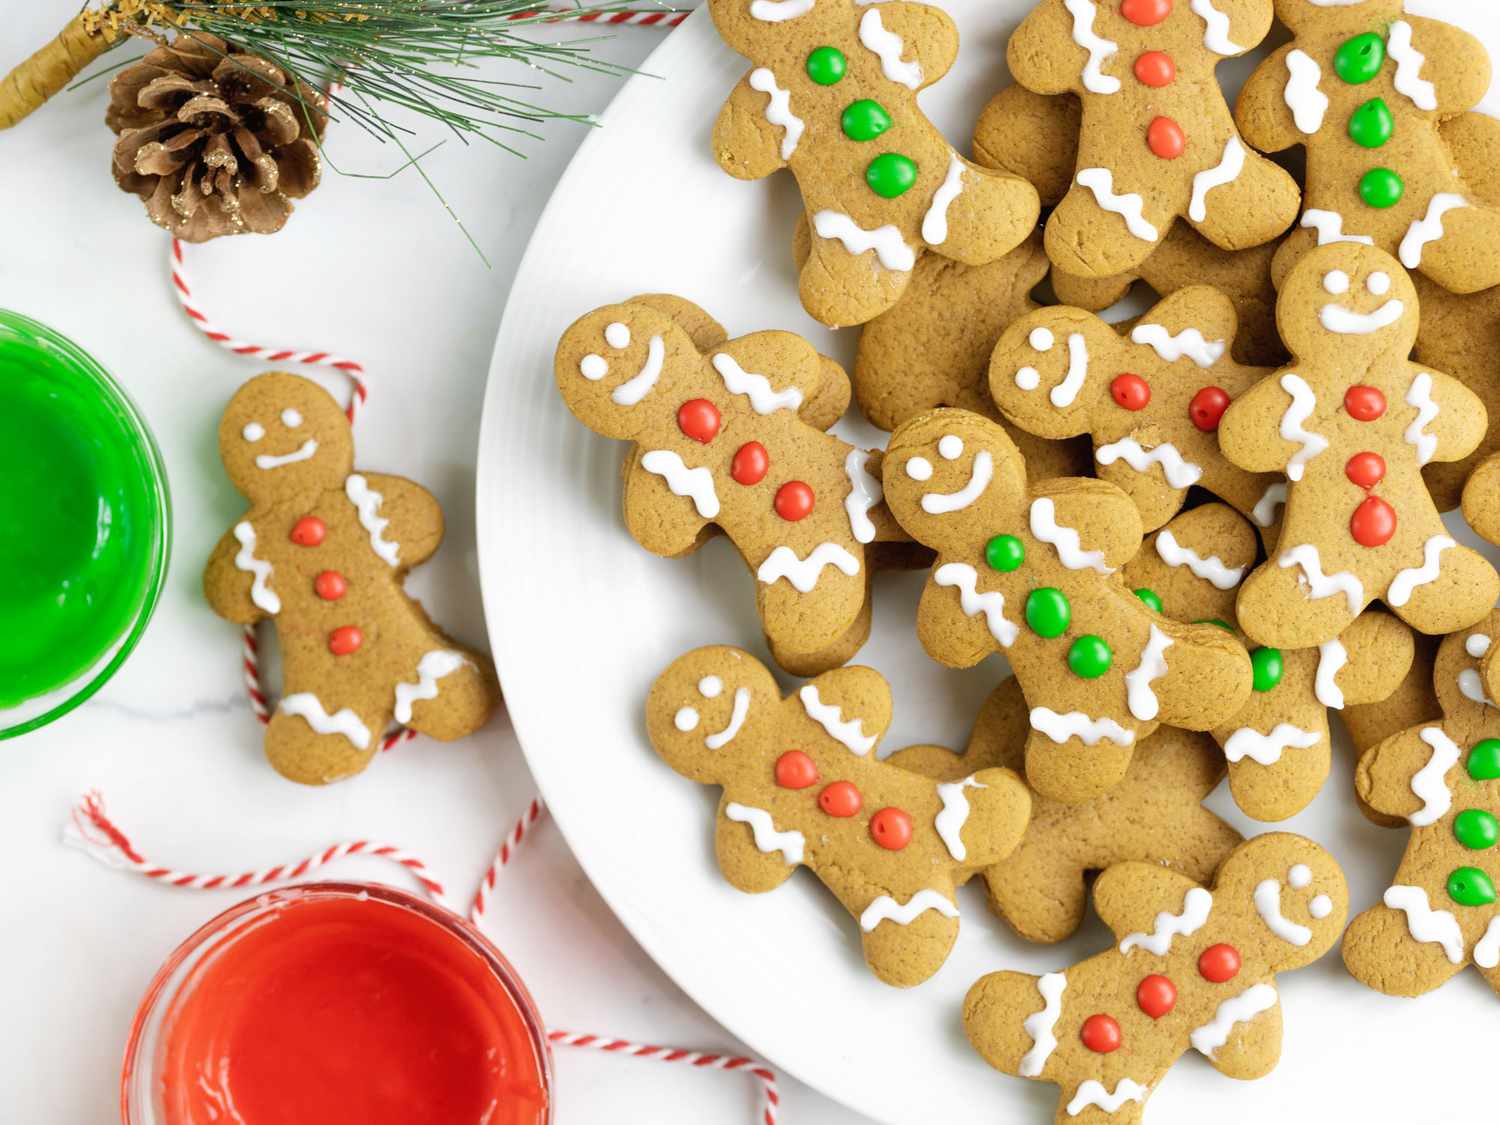 A top down view of a plate full of gingerbread people cookies decorated with white, red, and green frosting.